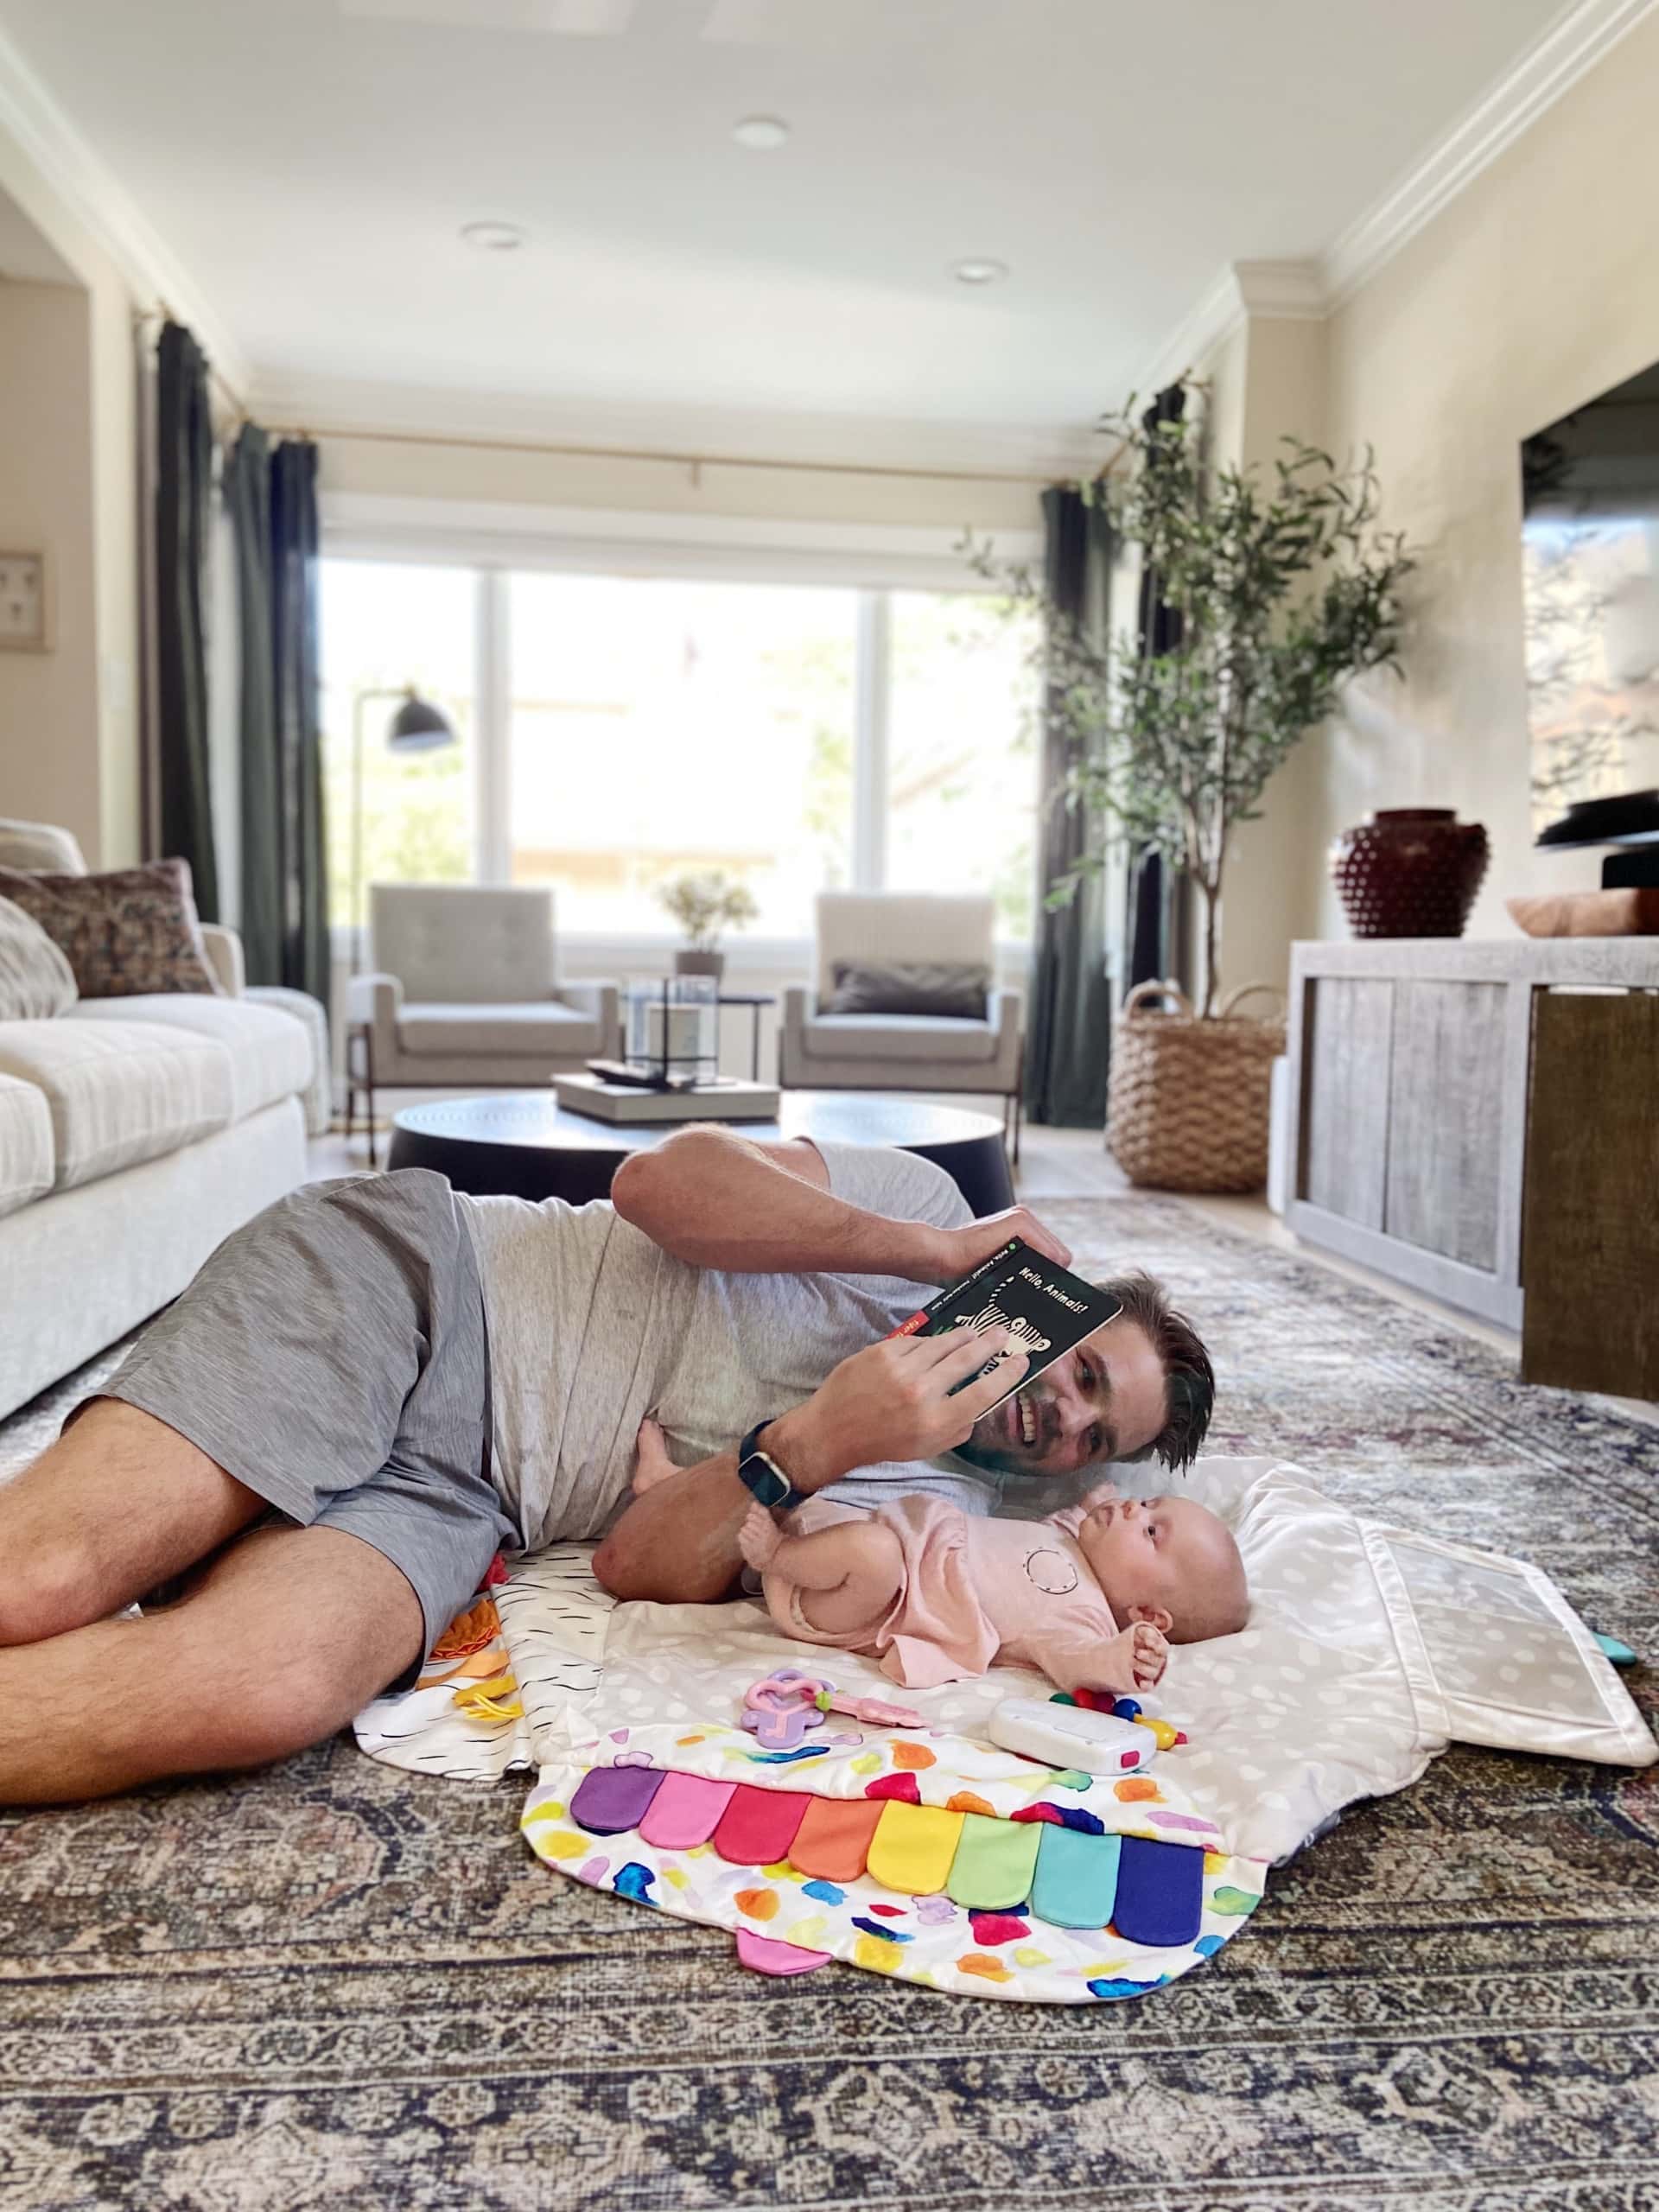 Our favorite newborn products include this lovevery playmat 